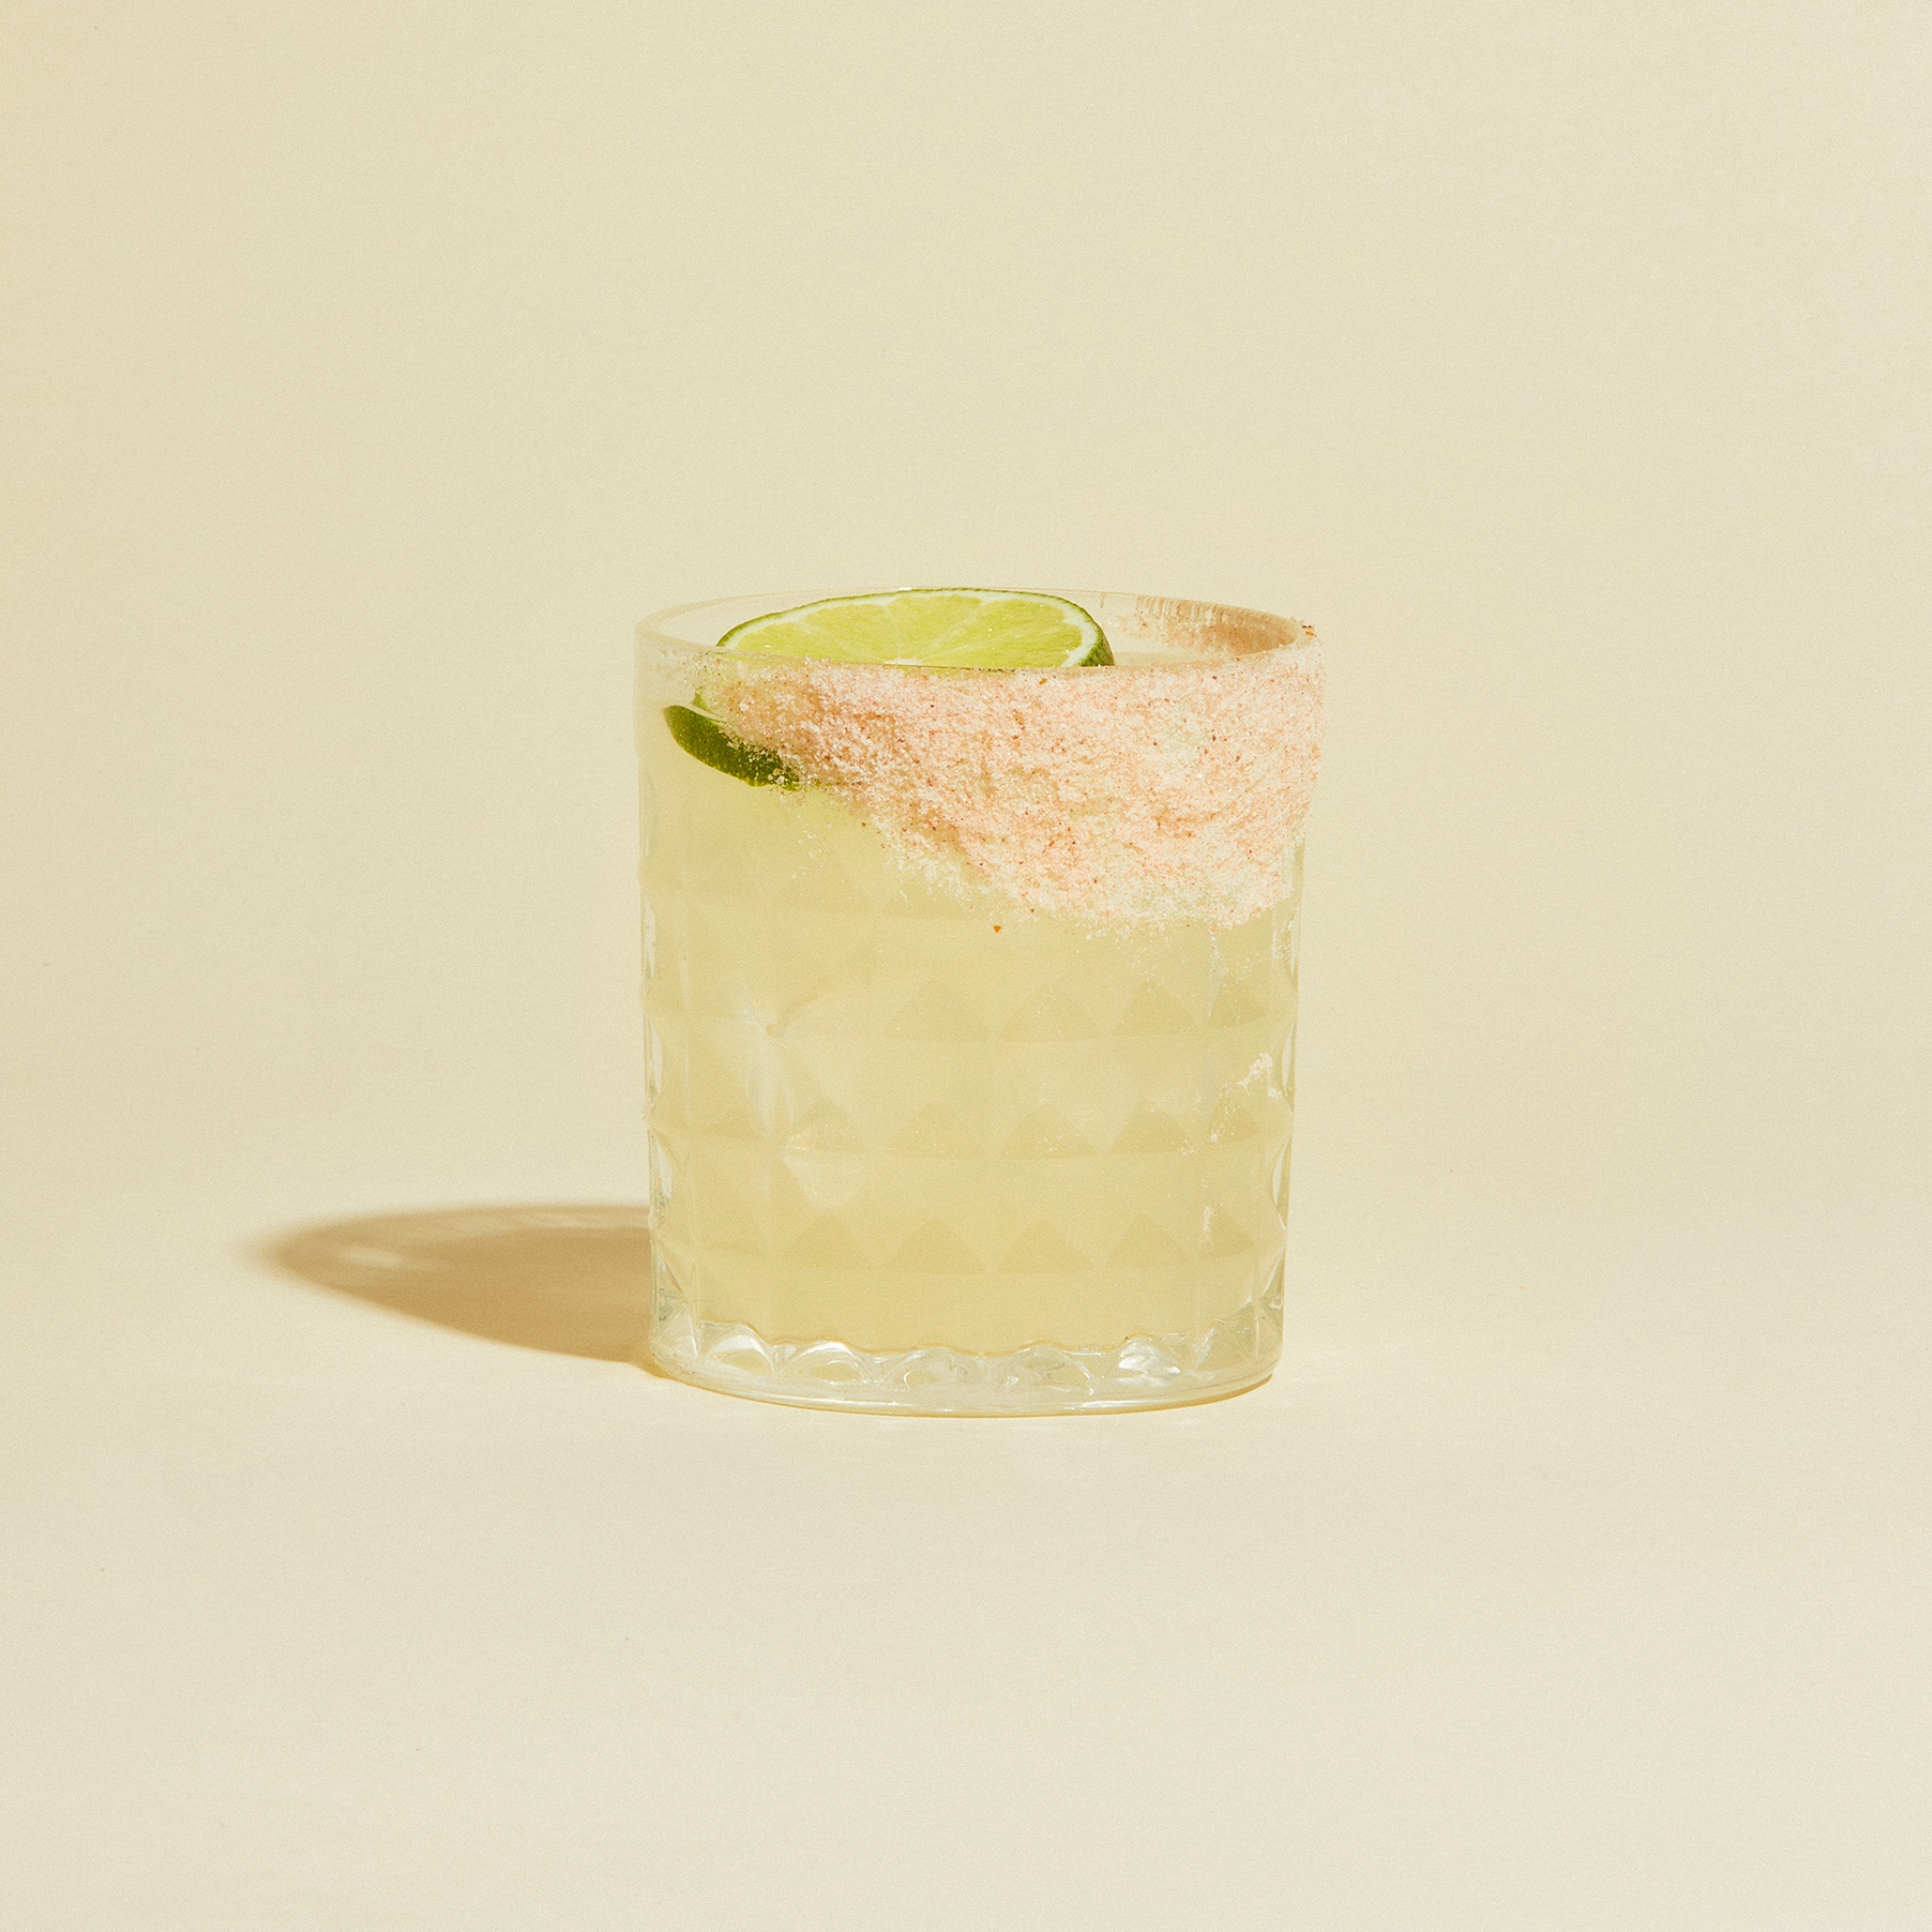 Skinny margarita made from single packets